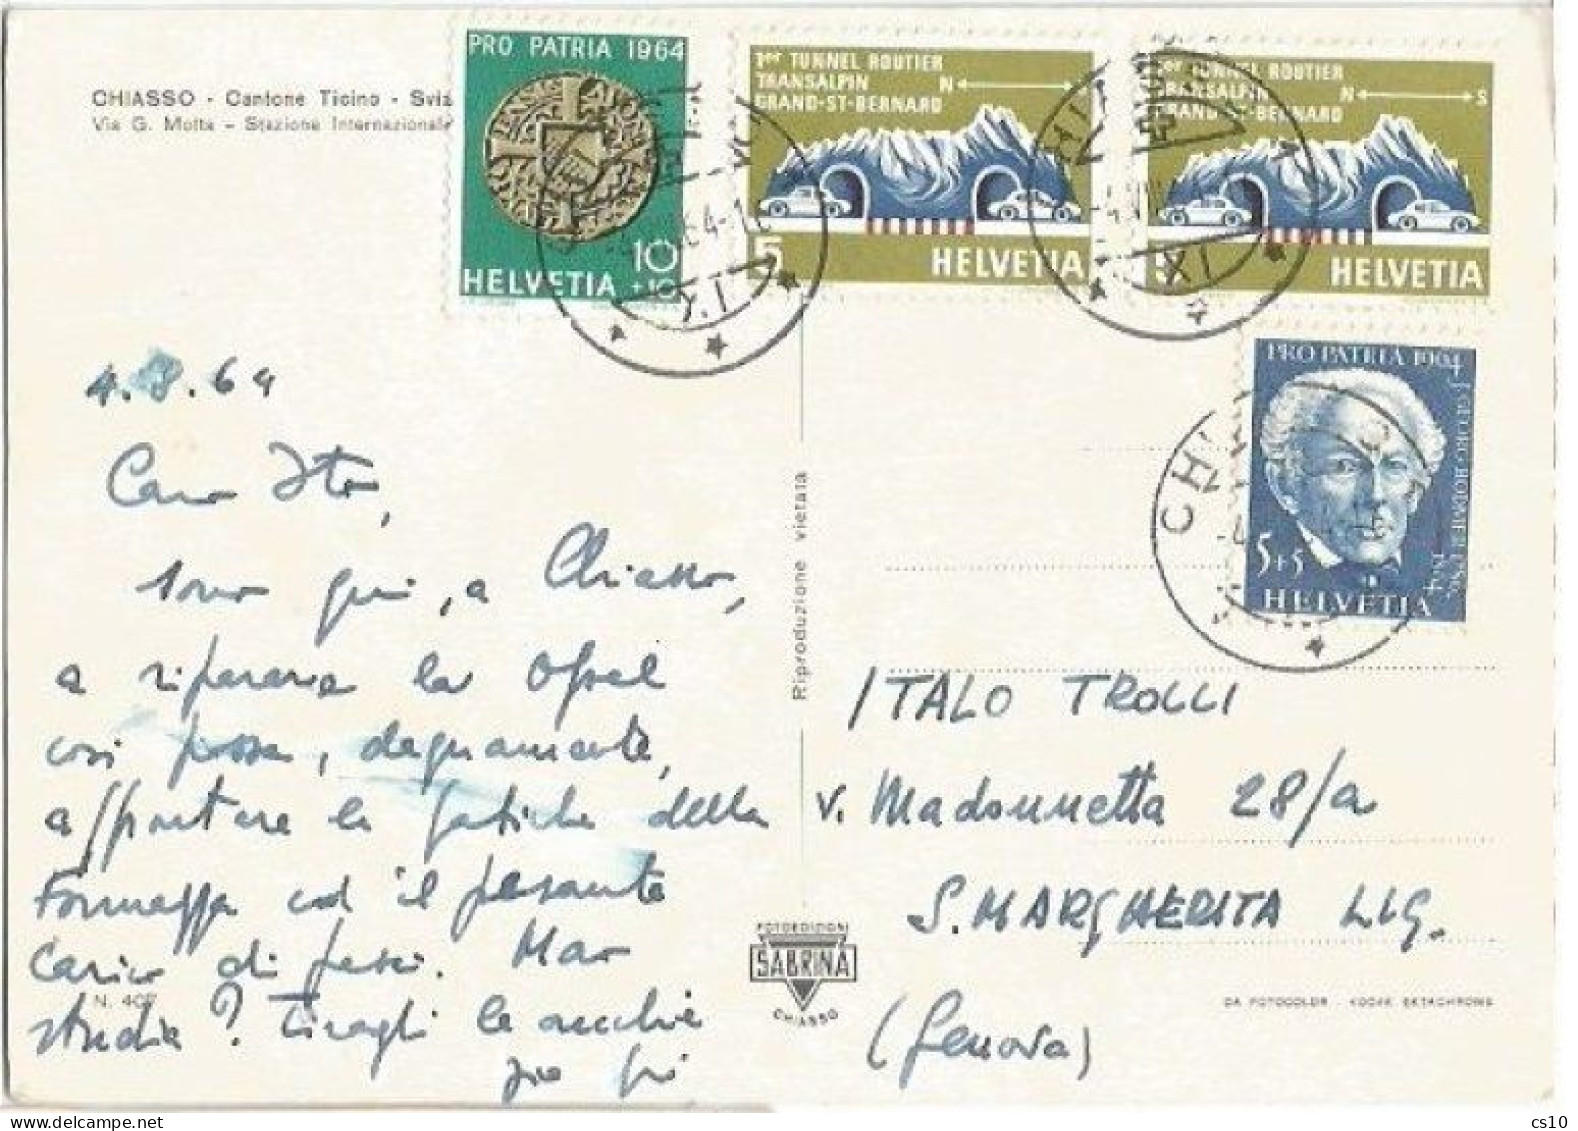 Suisse Nice Twin Values ( C.5 + C.5 + C.5 + Other ) Franking Pcard 1964 To Italy - Poststempel